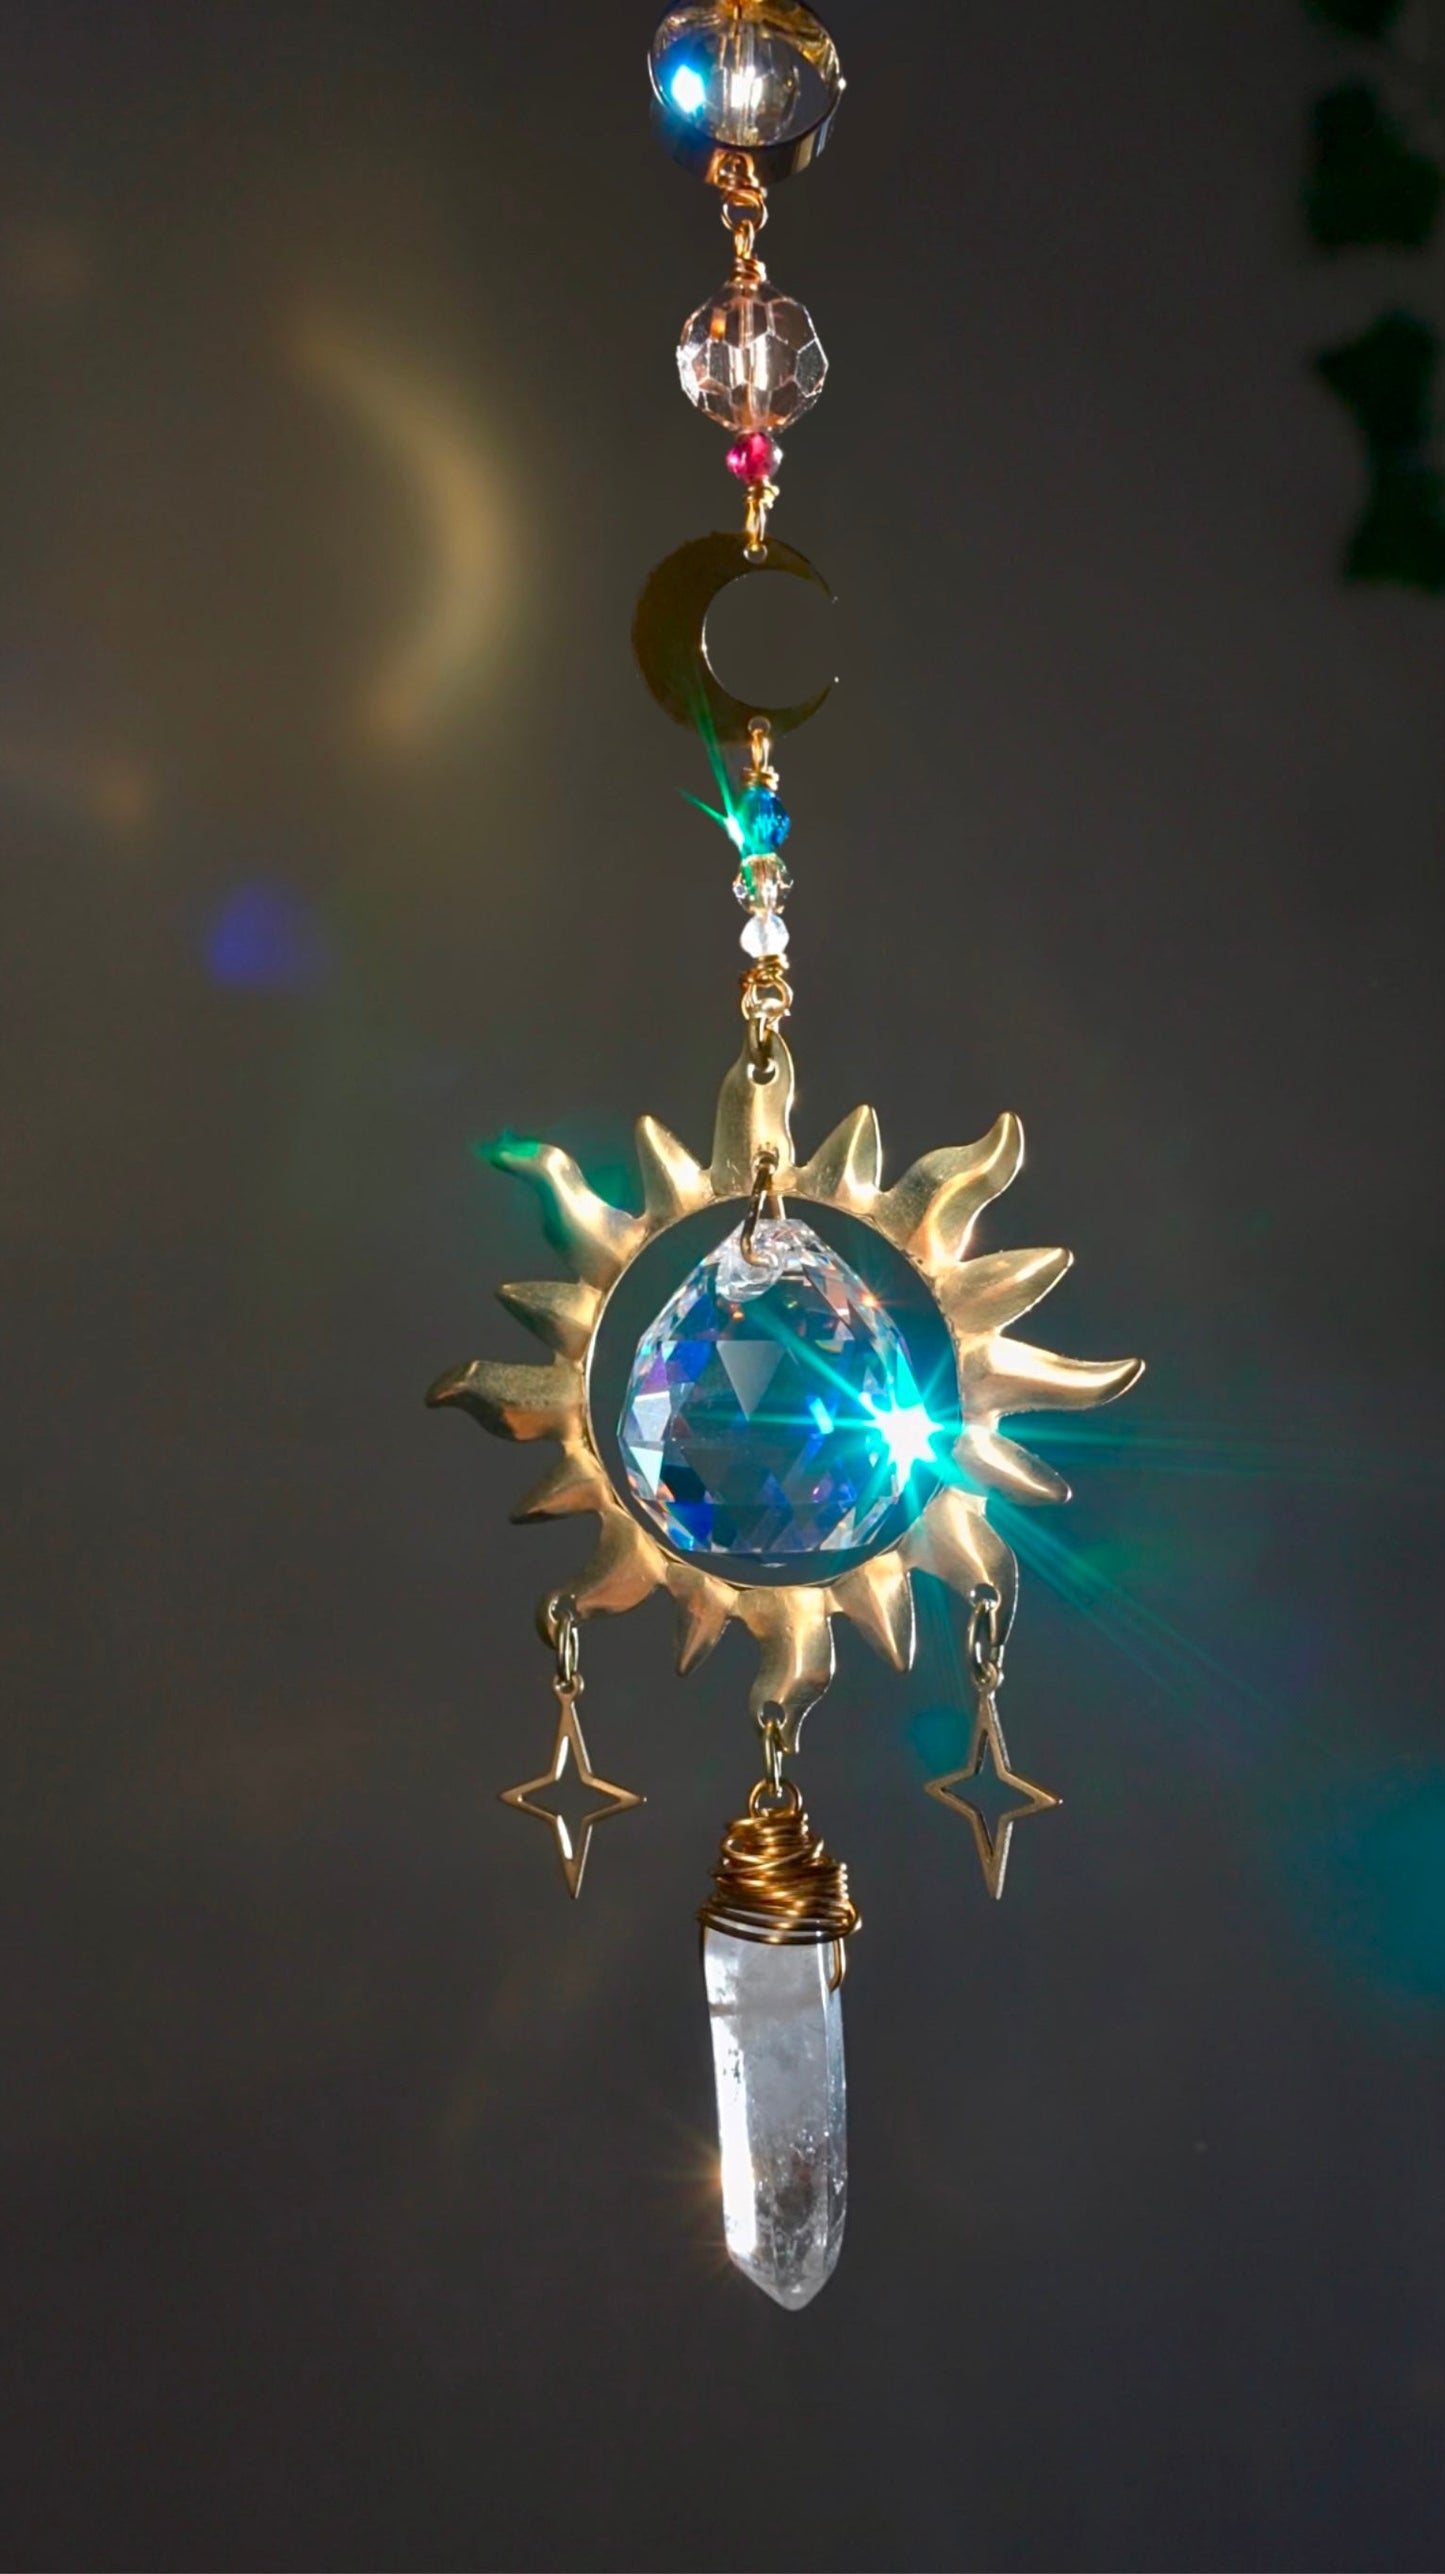 Gemstone Solar System Prism Car Charm Suncatcher, celestial planetary hanger made with crystals and 18k Gold-plated